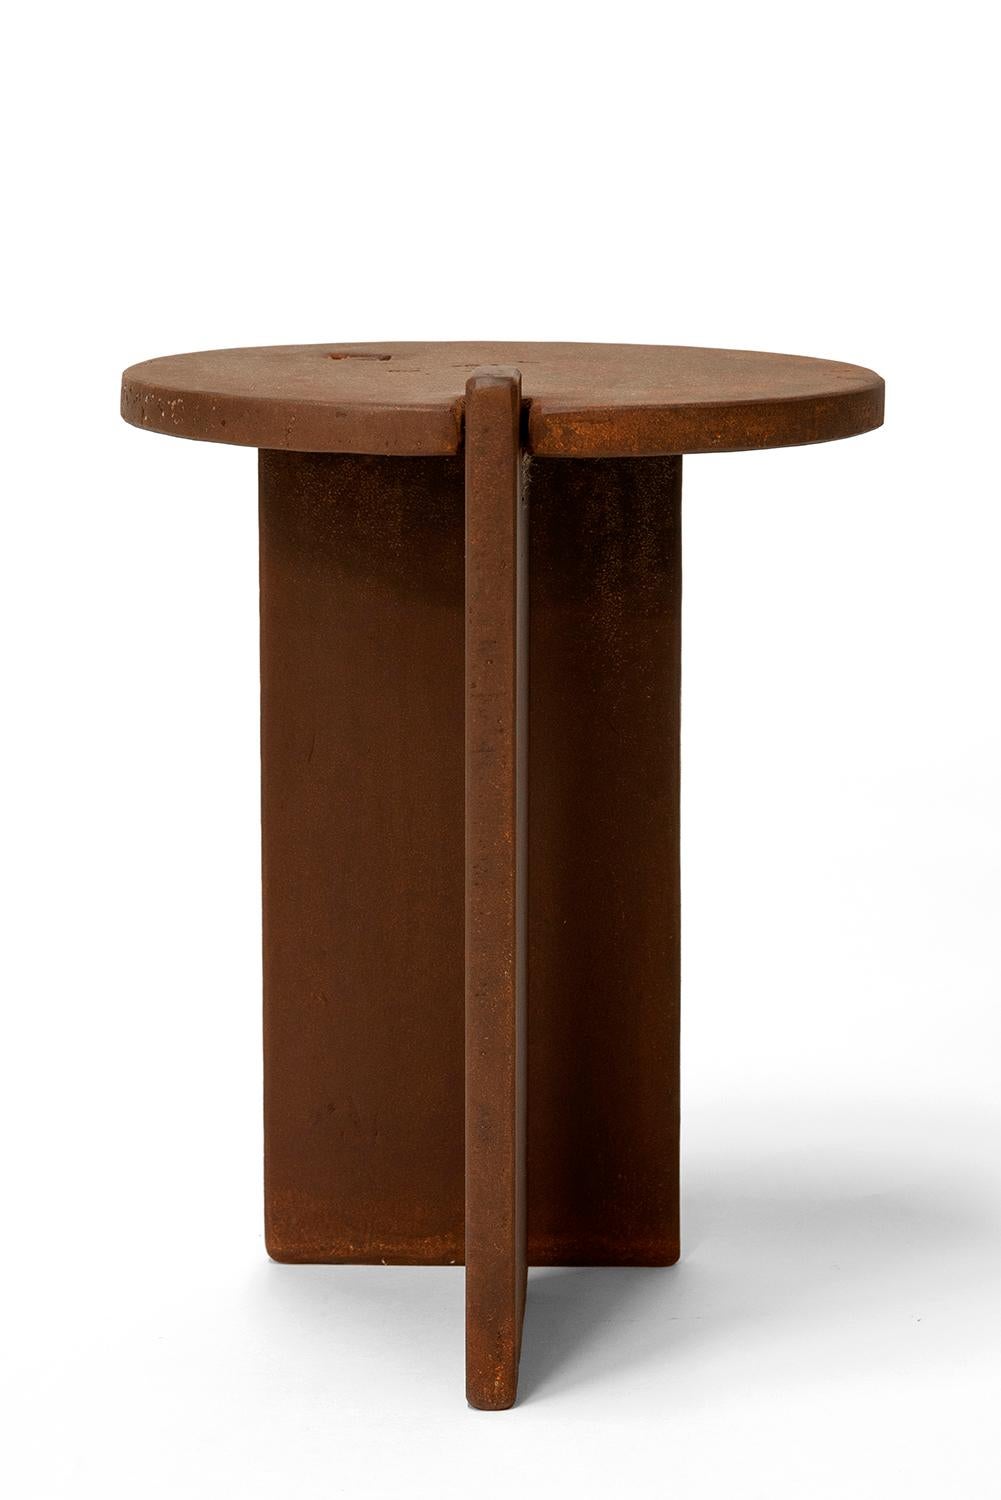 Cocktail Table Modern Hand-Shaped Round Handmade Corten Rust Steel In New Condition For Sale In Bronx, NY